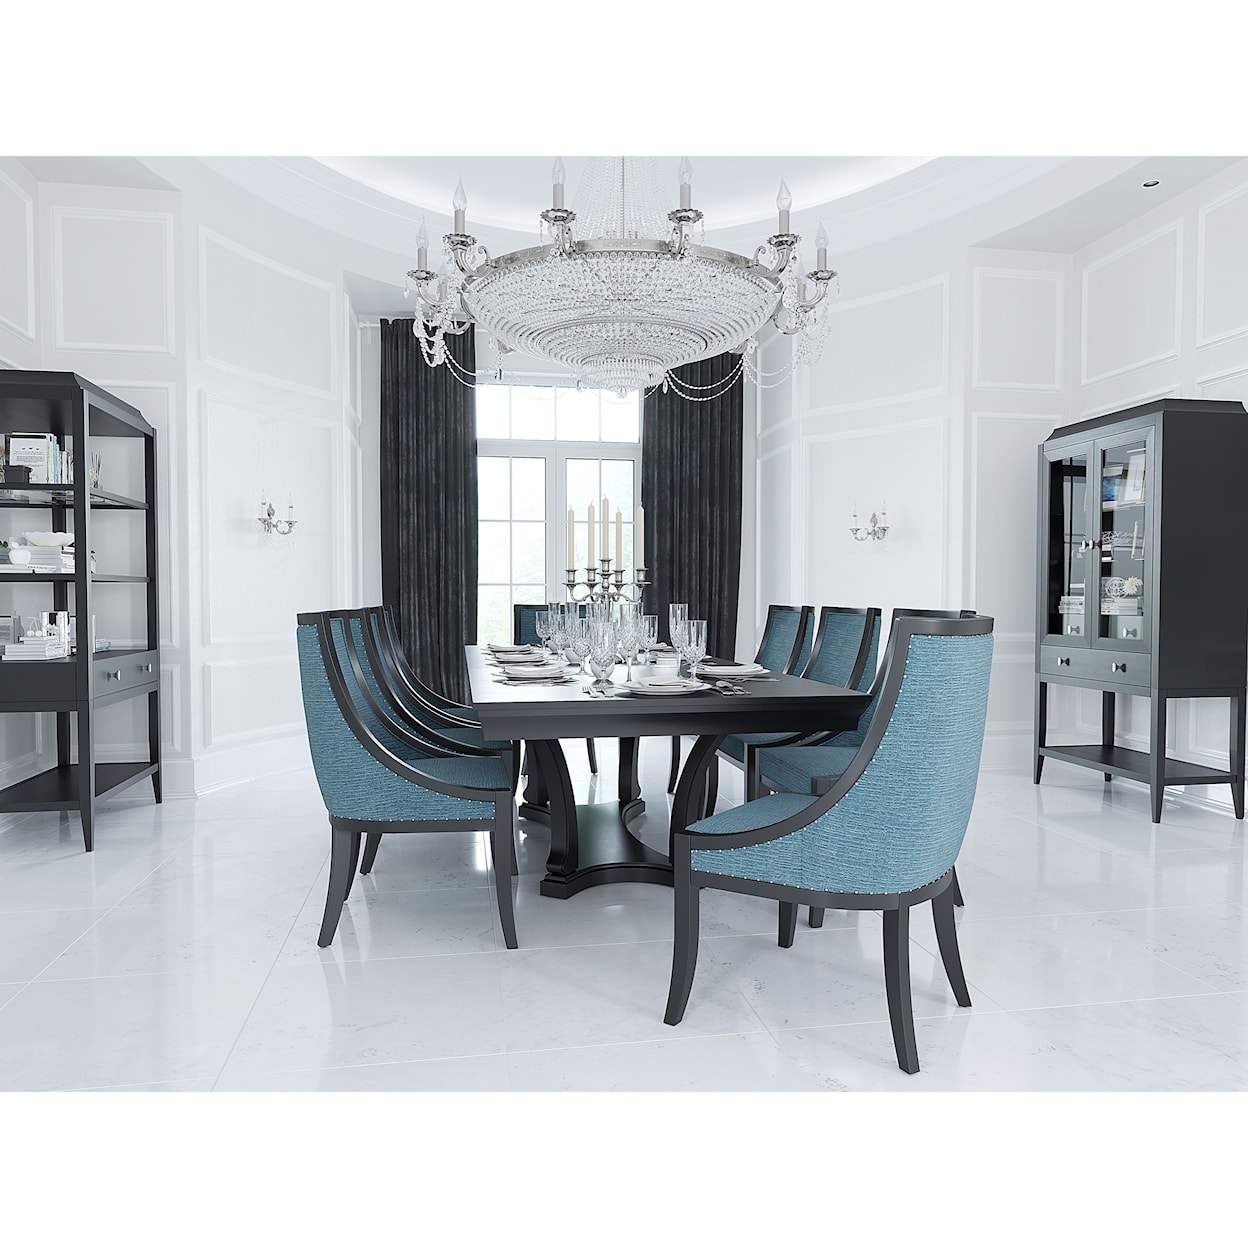 Canadel Classic Rectangular Dining Table Set